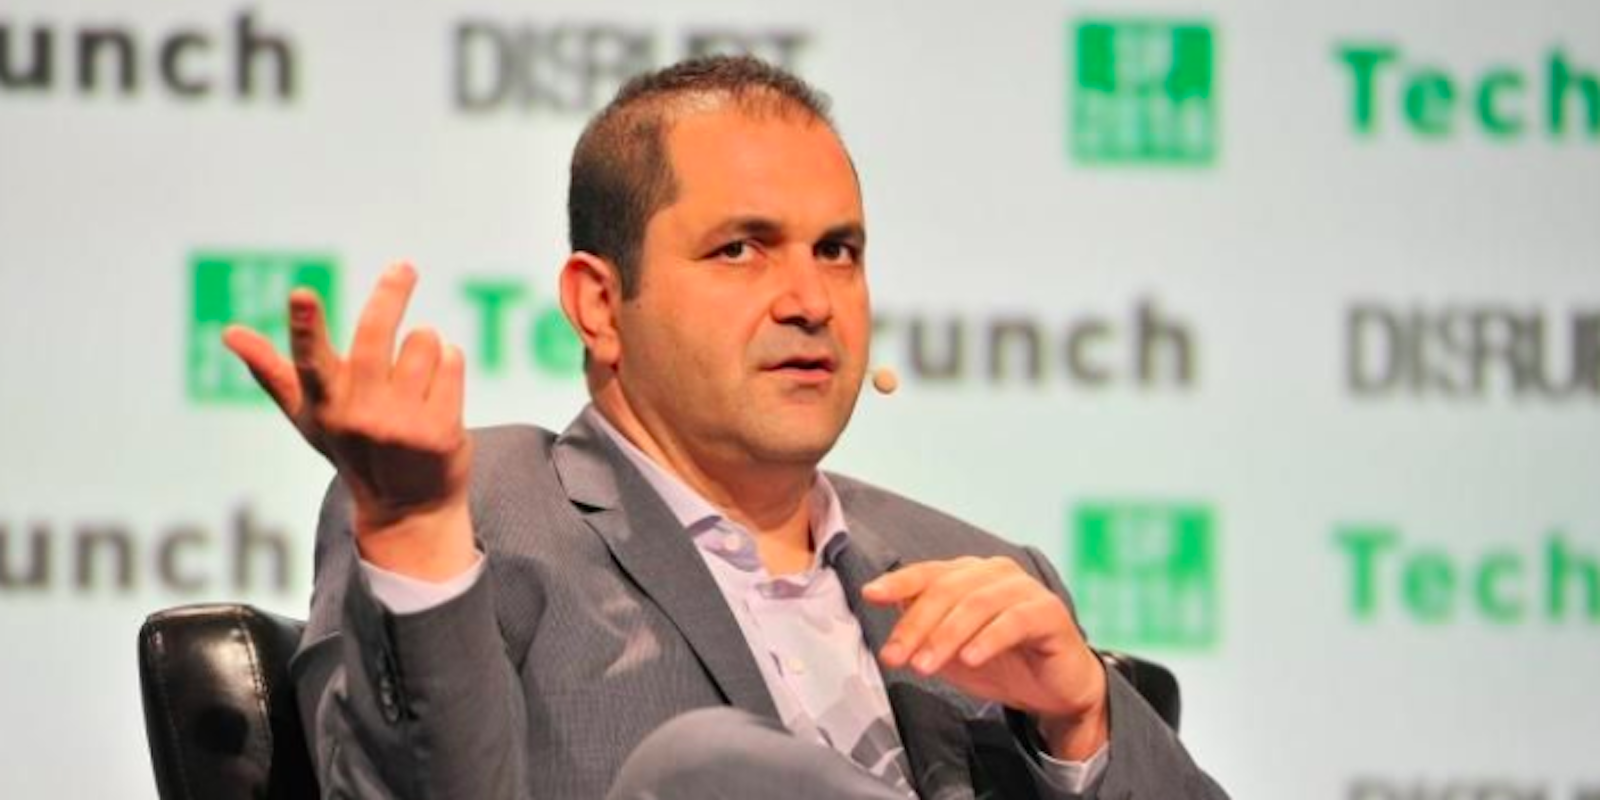 Shervin Pishevar took leave after being accused of sexual assault.